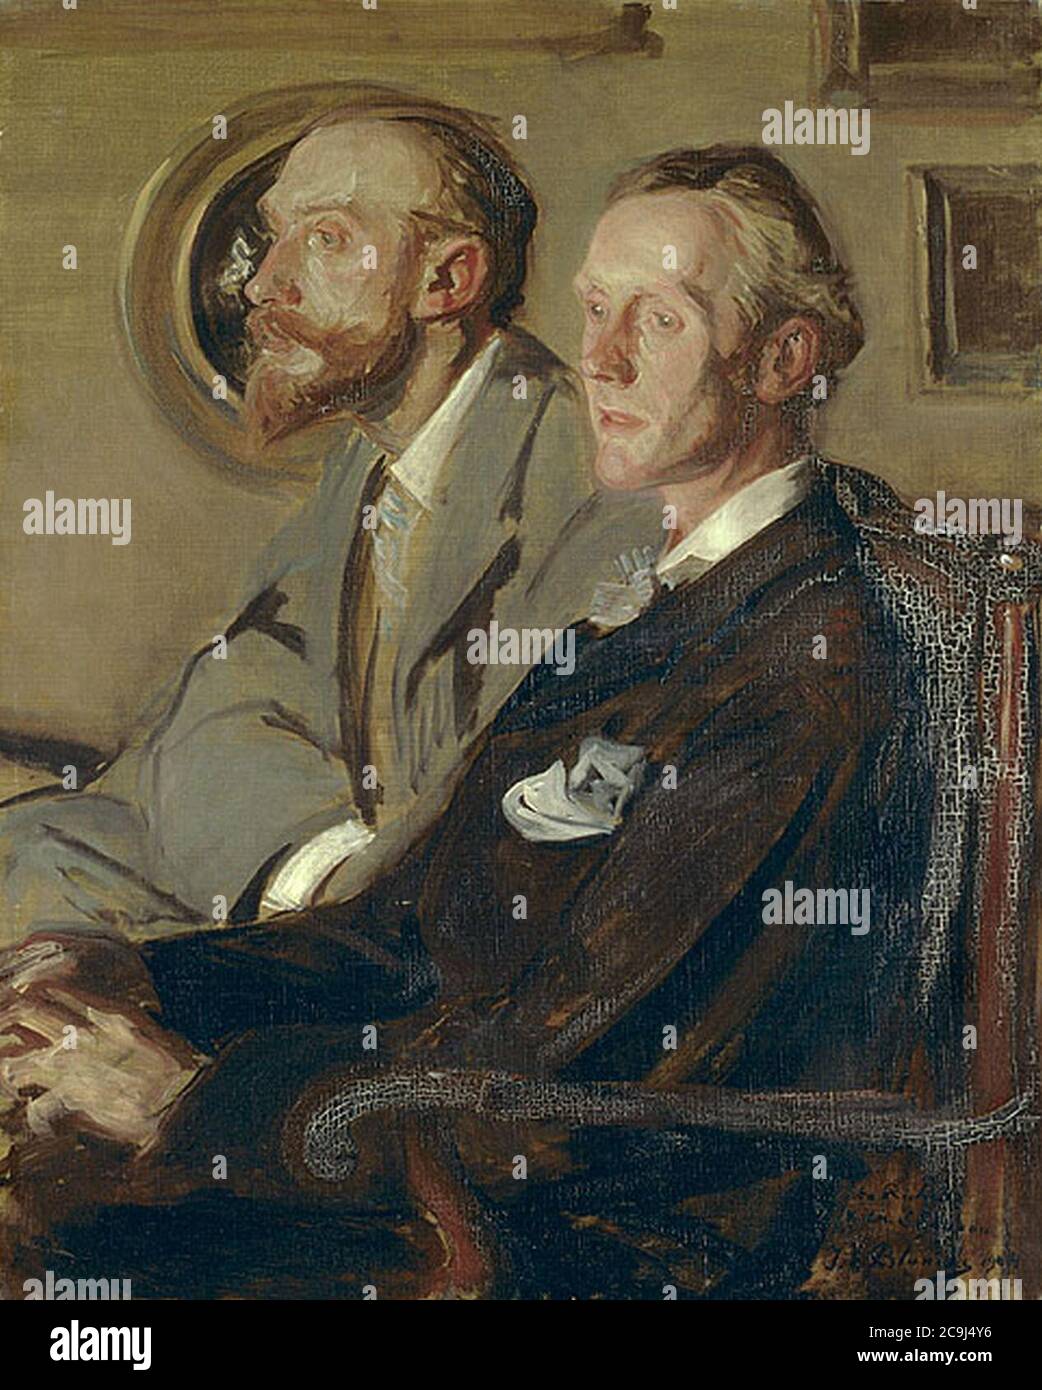 Jacques-Émile Blanche 1904 - Charles Shannon & Charles Ricketts. Stock Photo